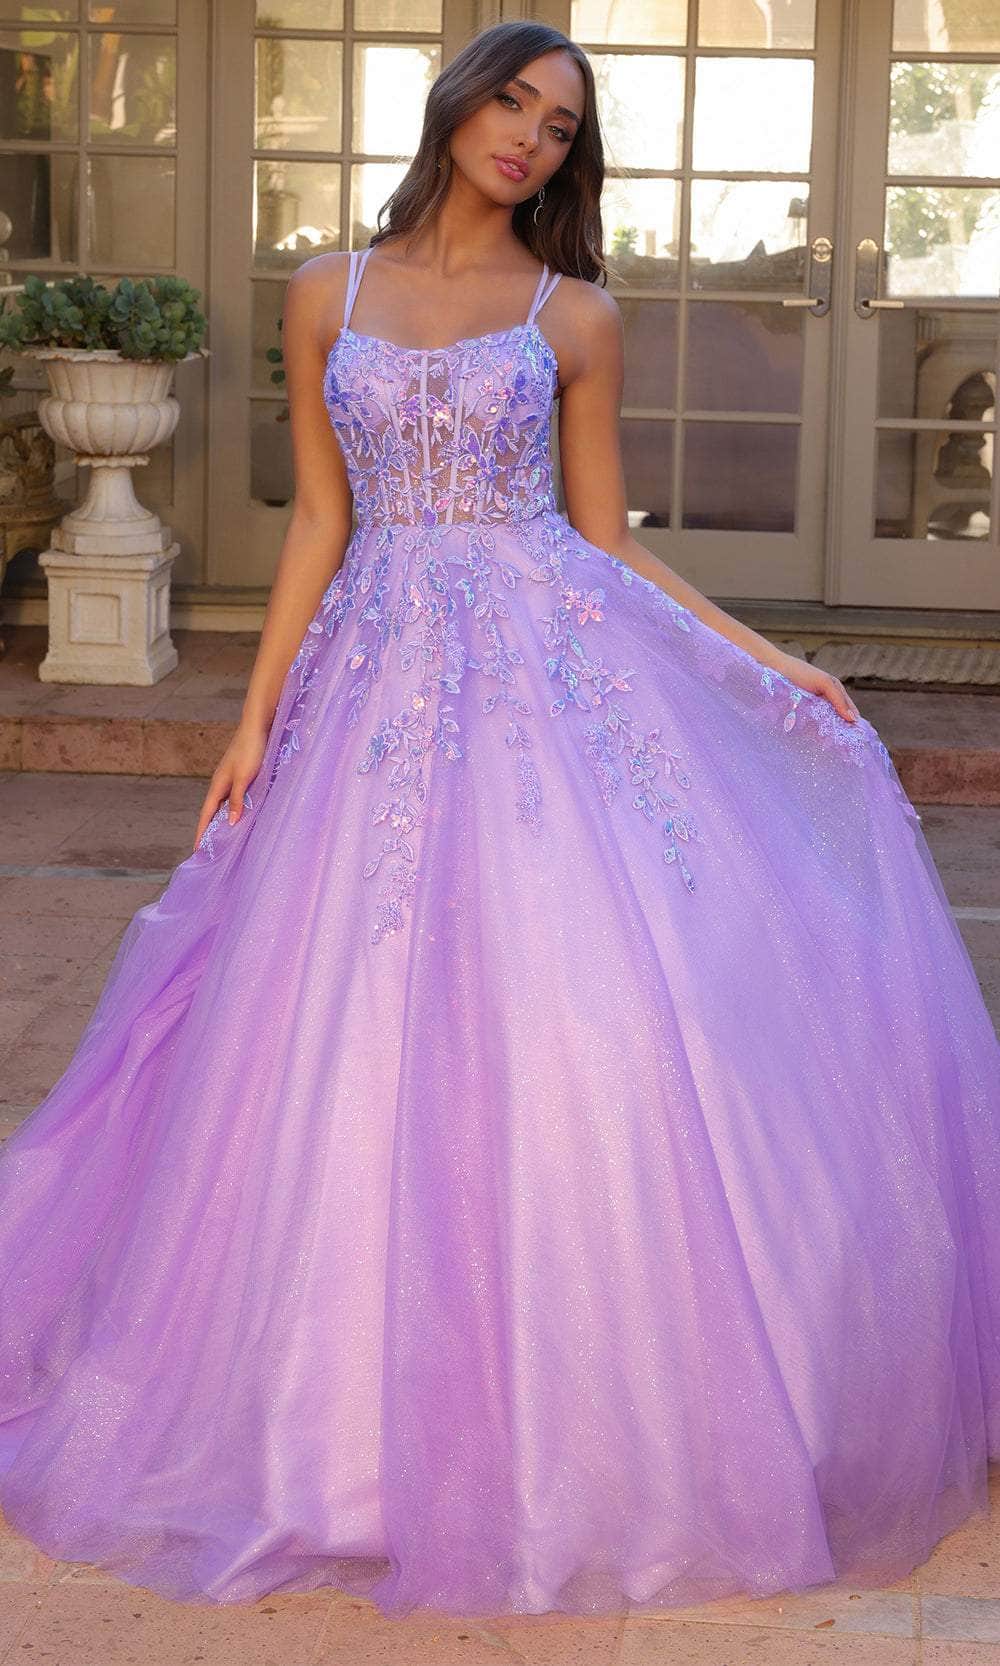 Nox Anabel H1271 - Sweetheart Floral Ballgown Special Occasion Dress 0 / Lavender